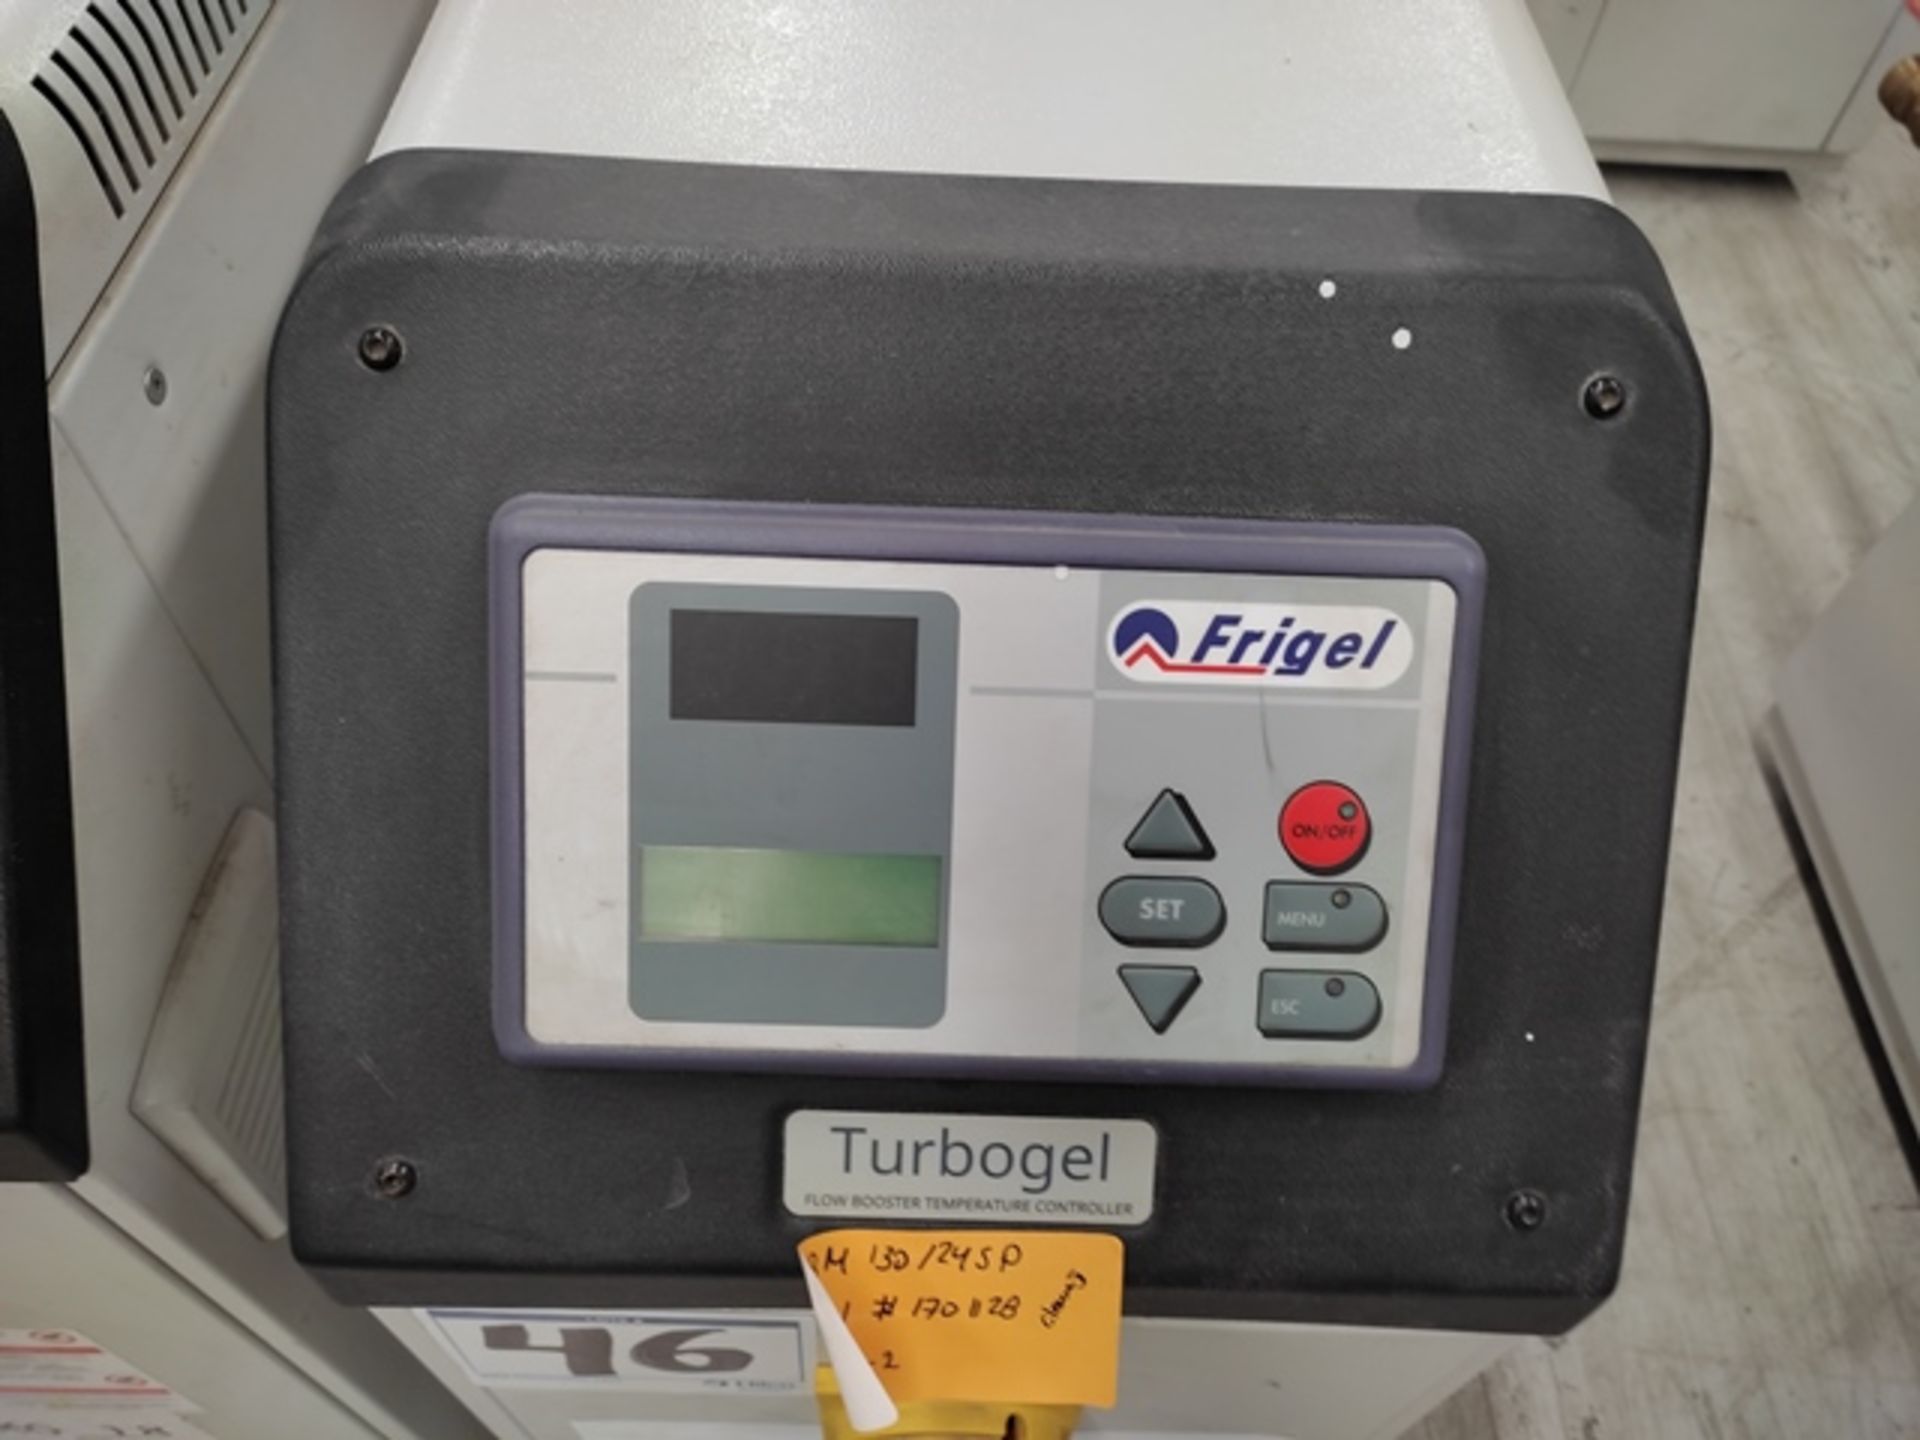 Lot of: (2) Frigel RBM130/24 SP 24 KW Flow Booster Temperature Controllers, Mfg. Year: 2017 - Image 6 of 9